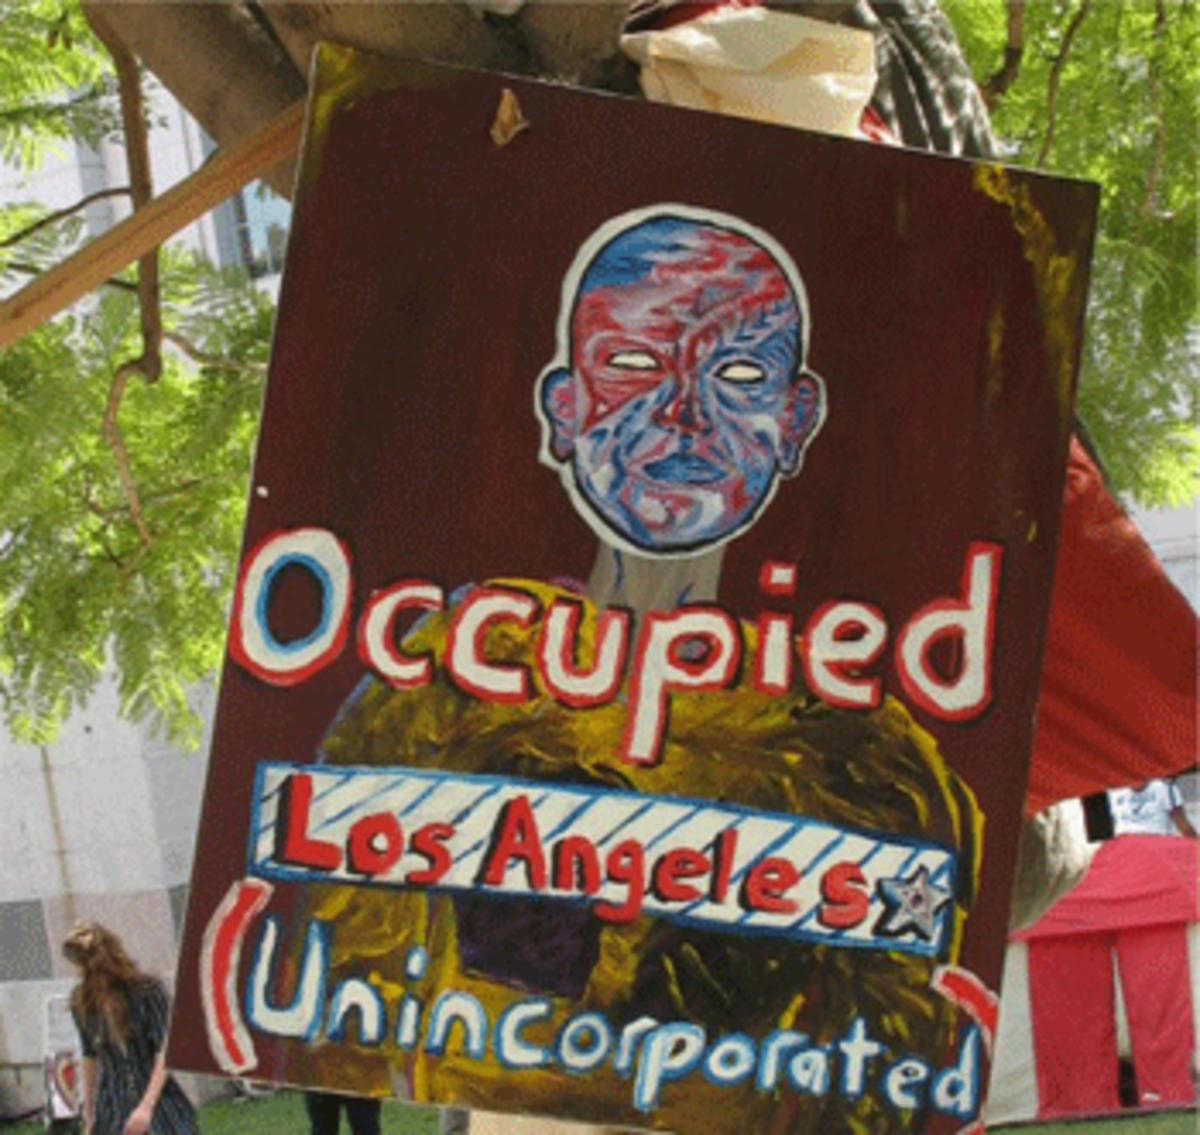 occupy fights foreclosure